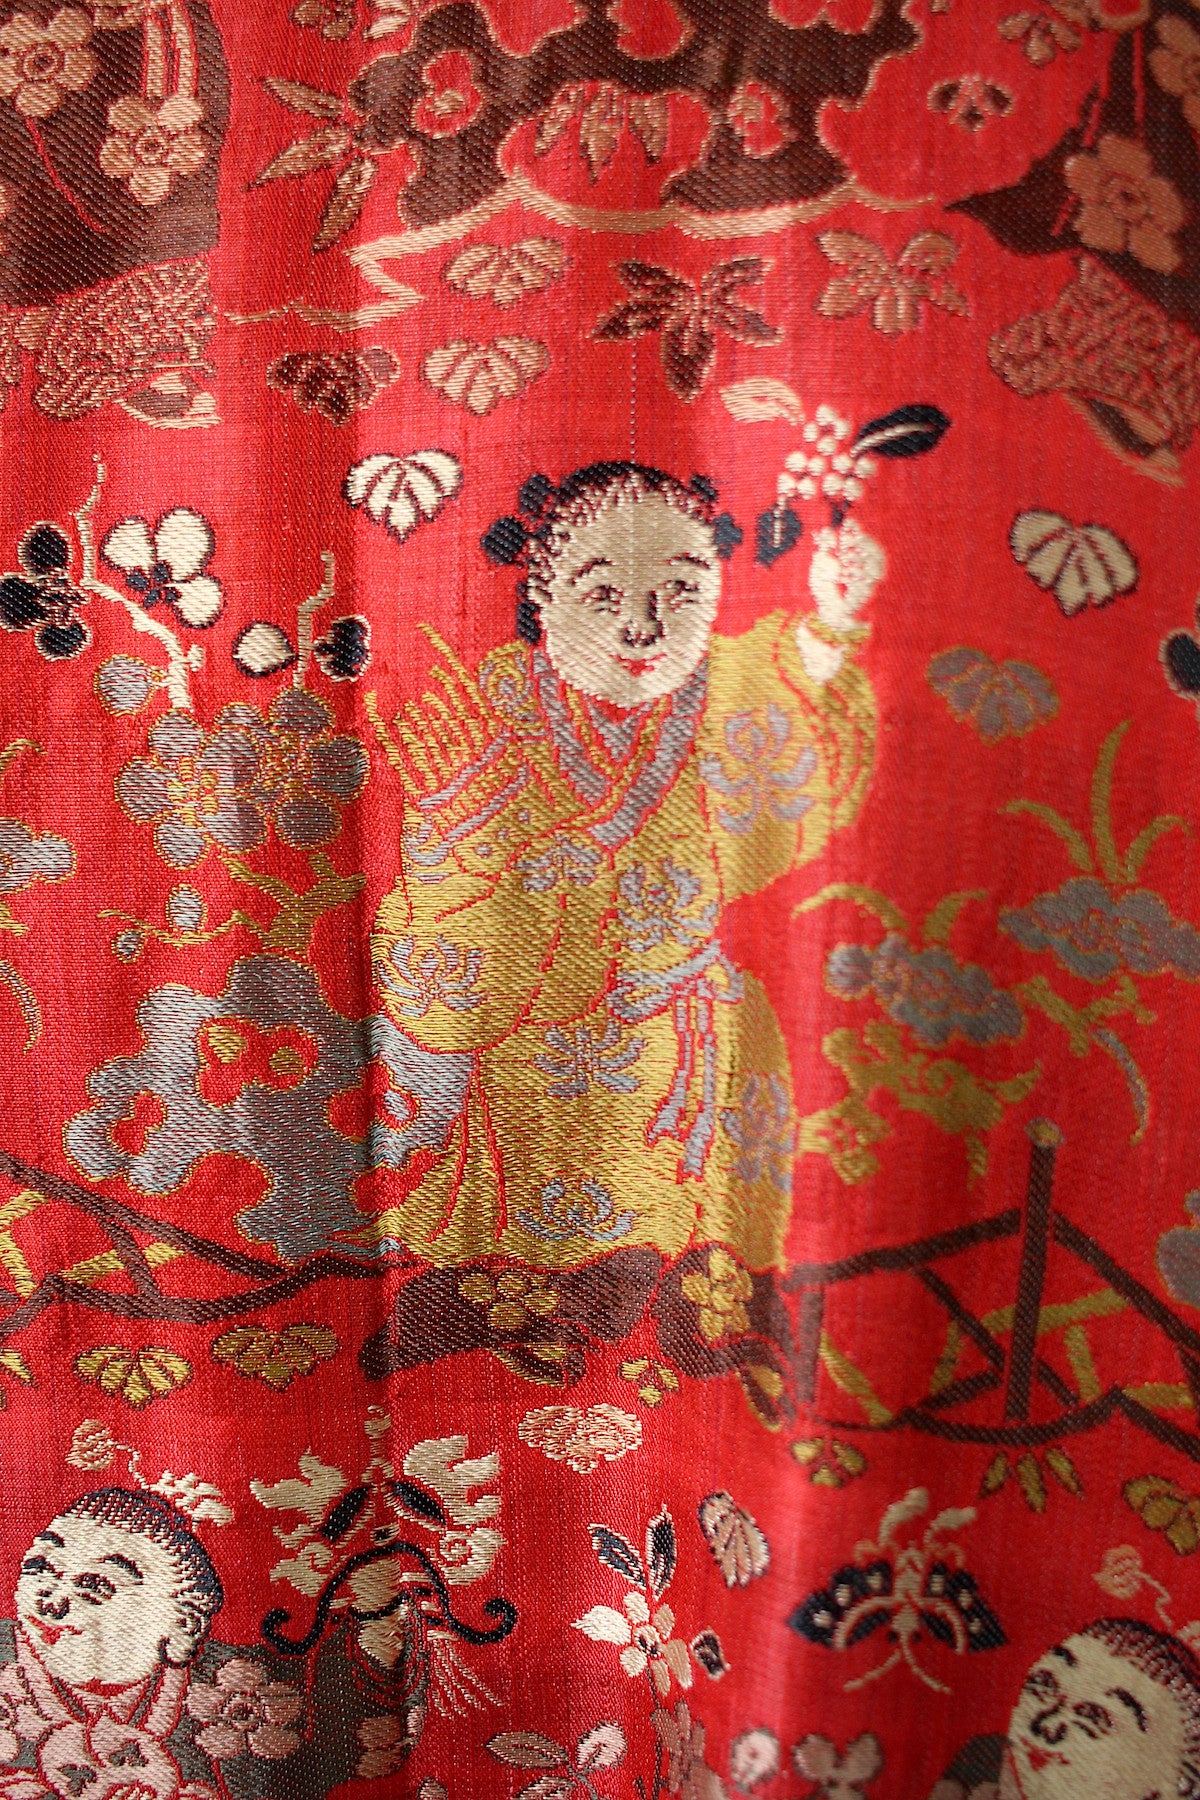 Museum Quality Antique Chinese Silk Brocade Robe 1900s-1910s